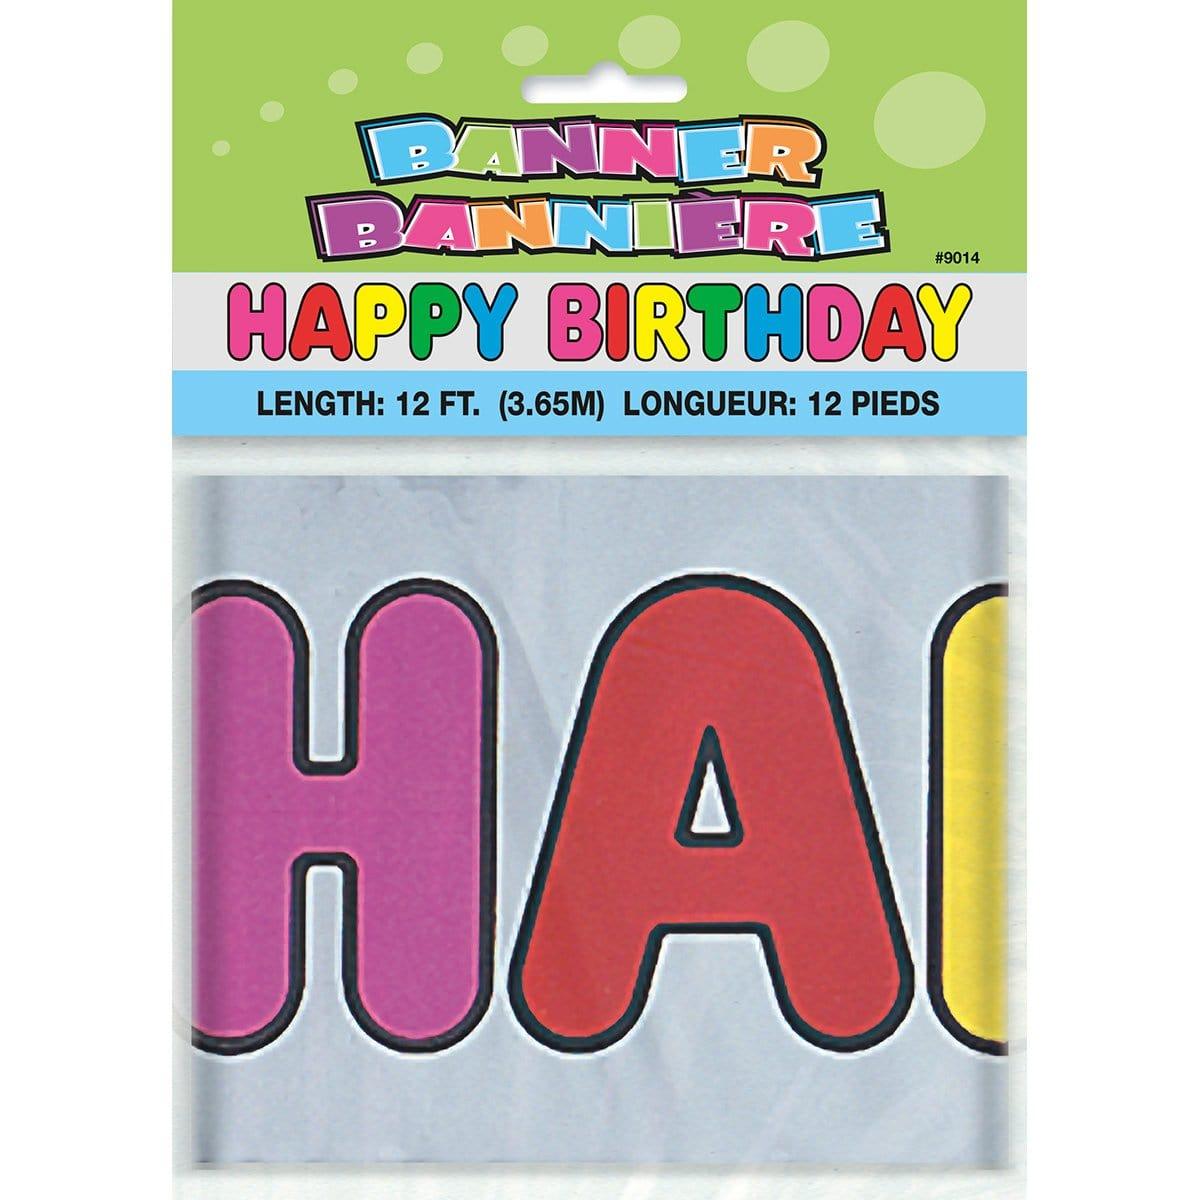 Buy General Birthday Foil Happy Bday Bannr 12ft sold at Party Expert